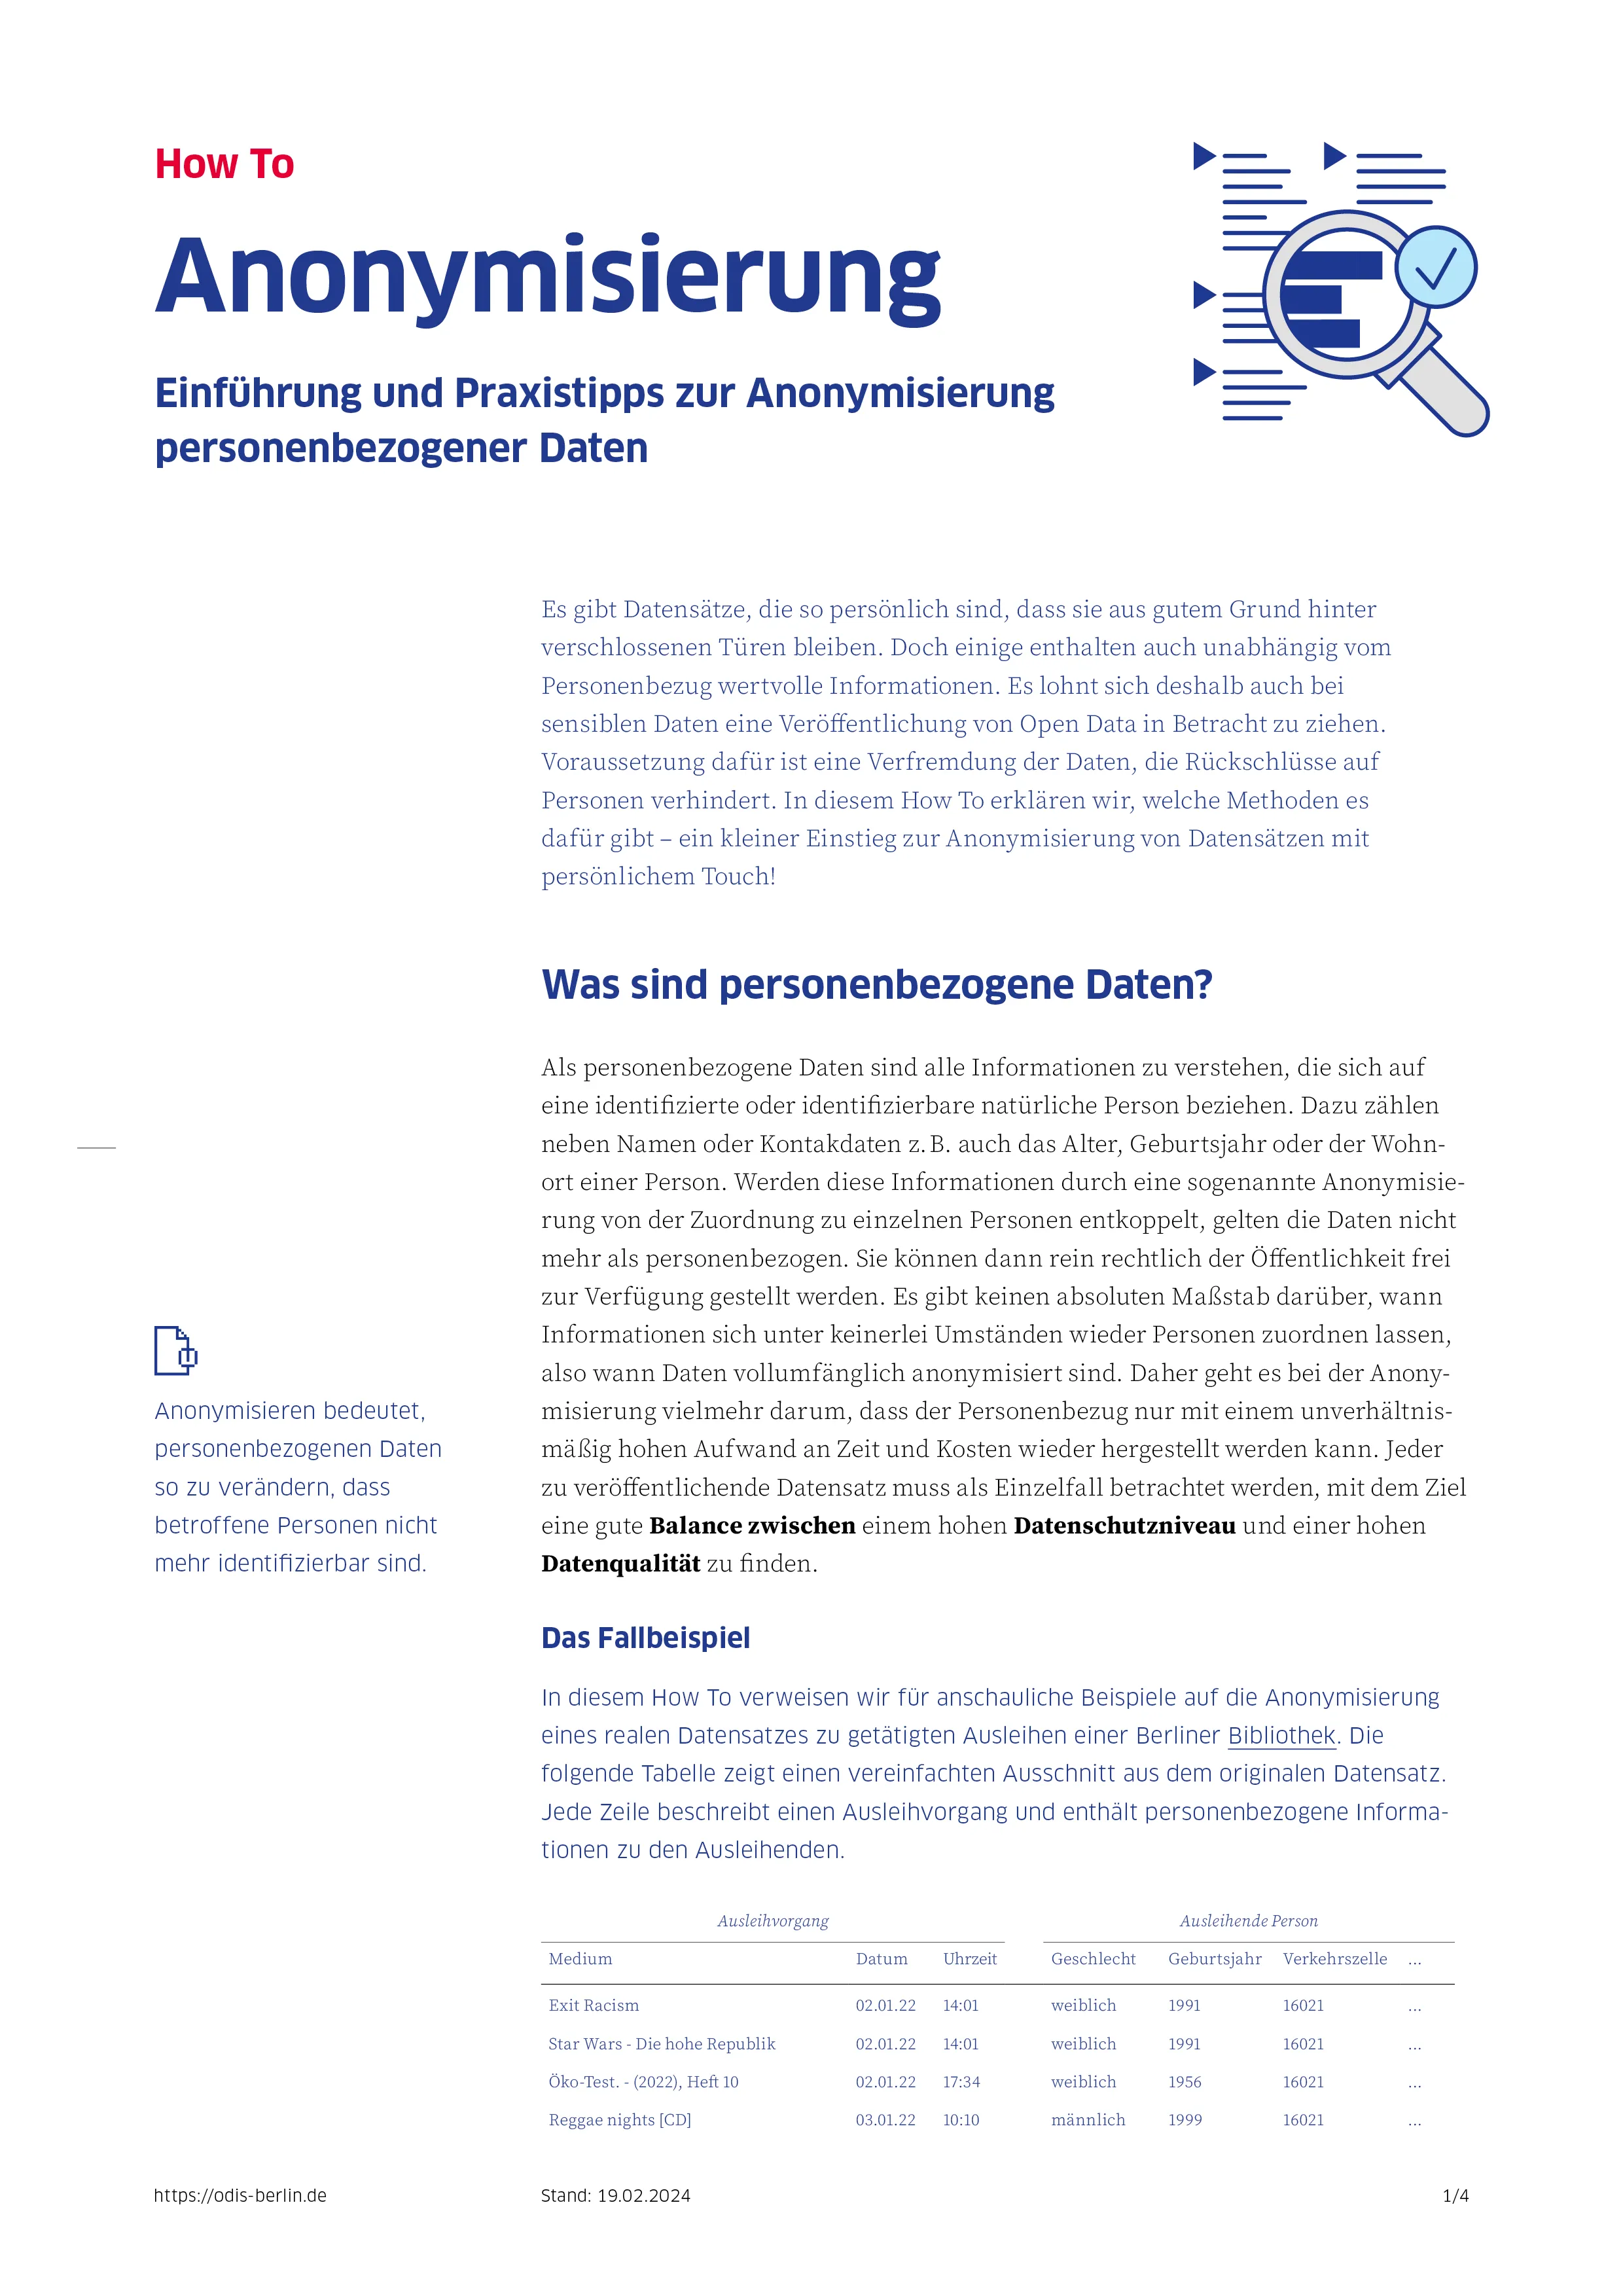 Media thumbnail preview of "Anonymisierung"